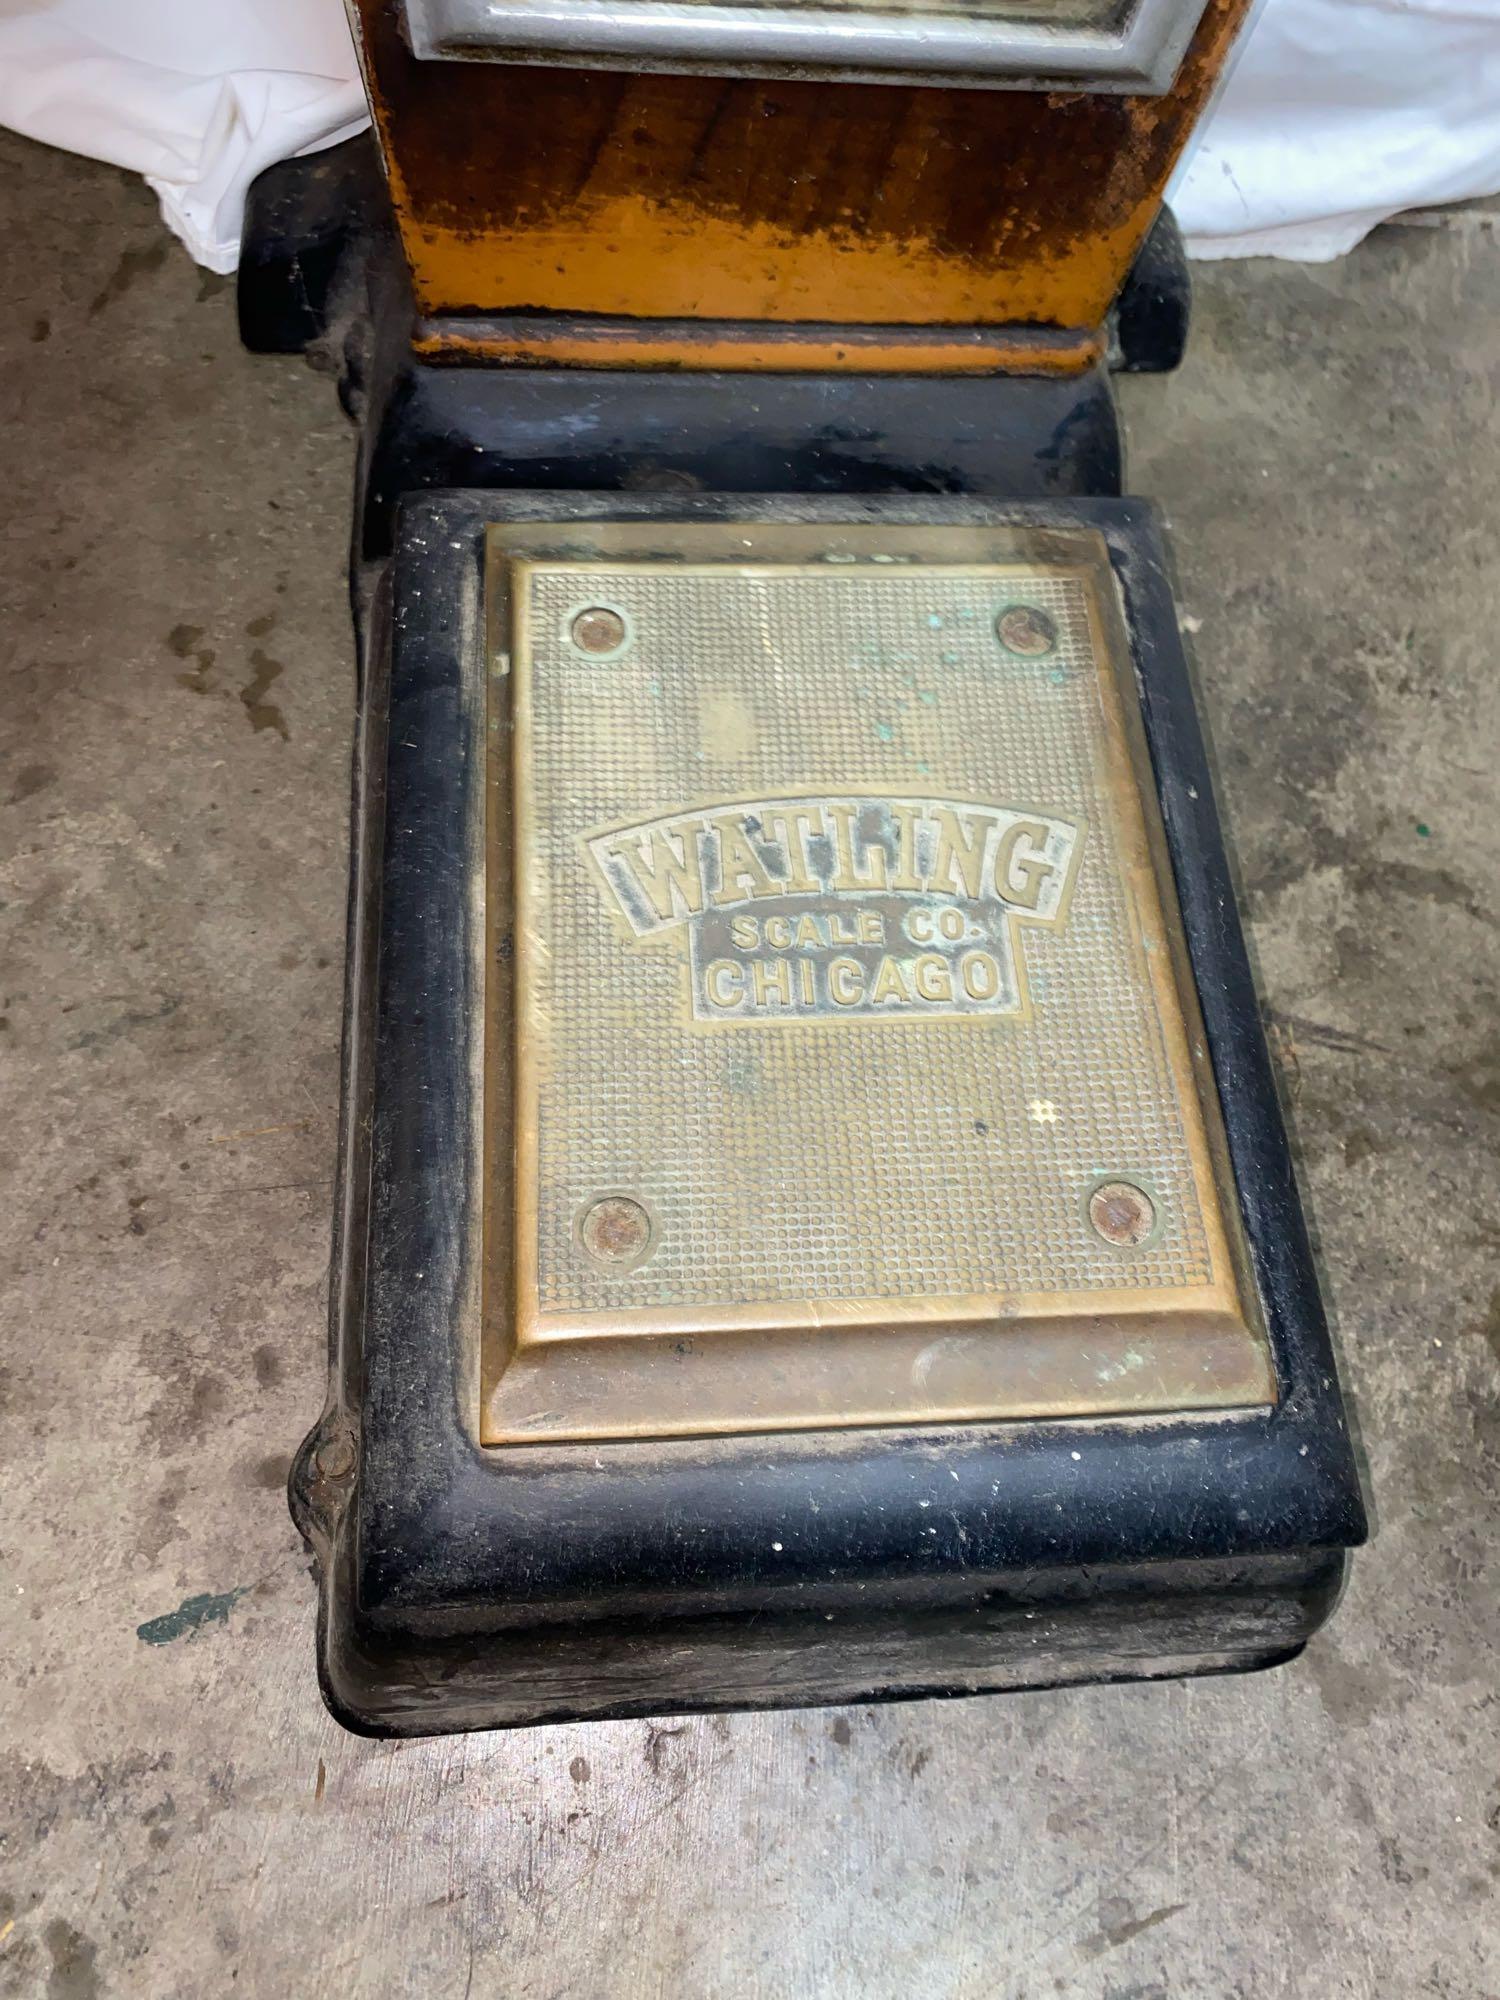 Watling Penny operated scale